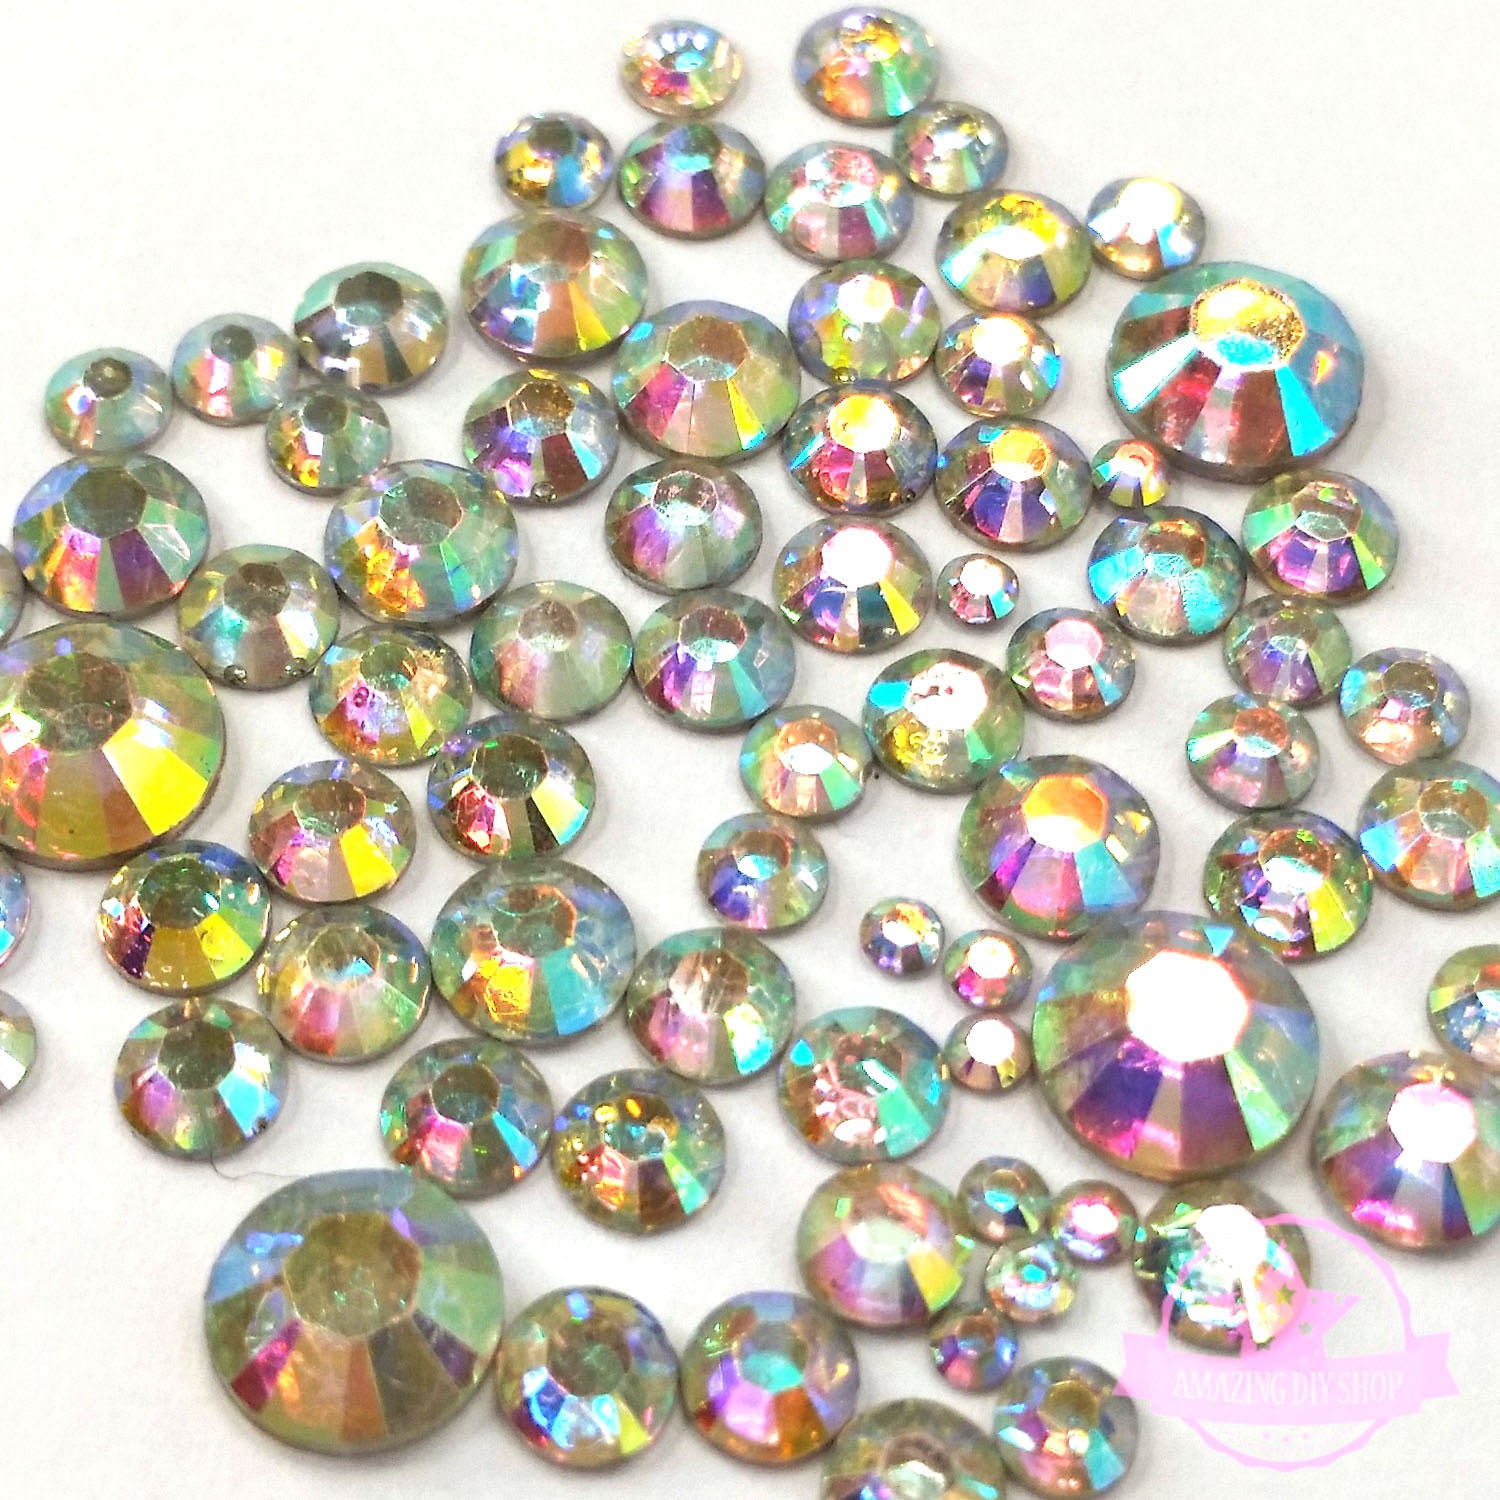 Bulk Loose Sew on Gems Rhinestones Jewels Over 700 Pieces Assorted Colors &  Sizes 